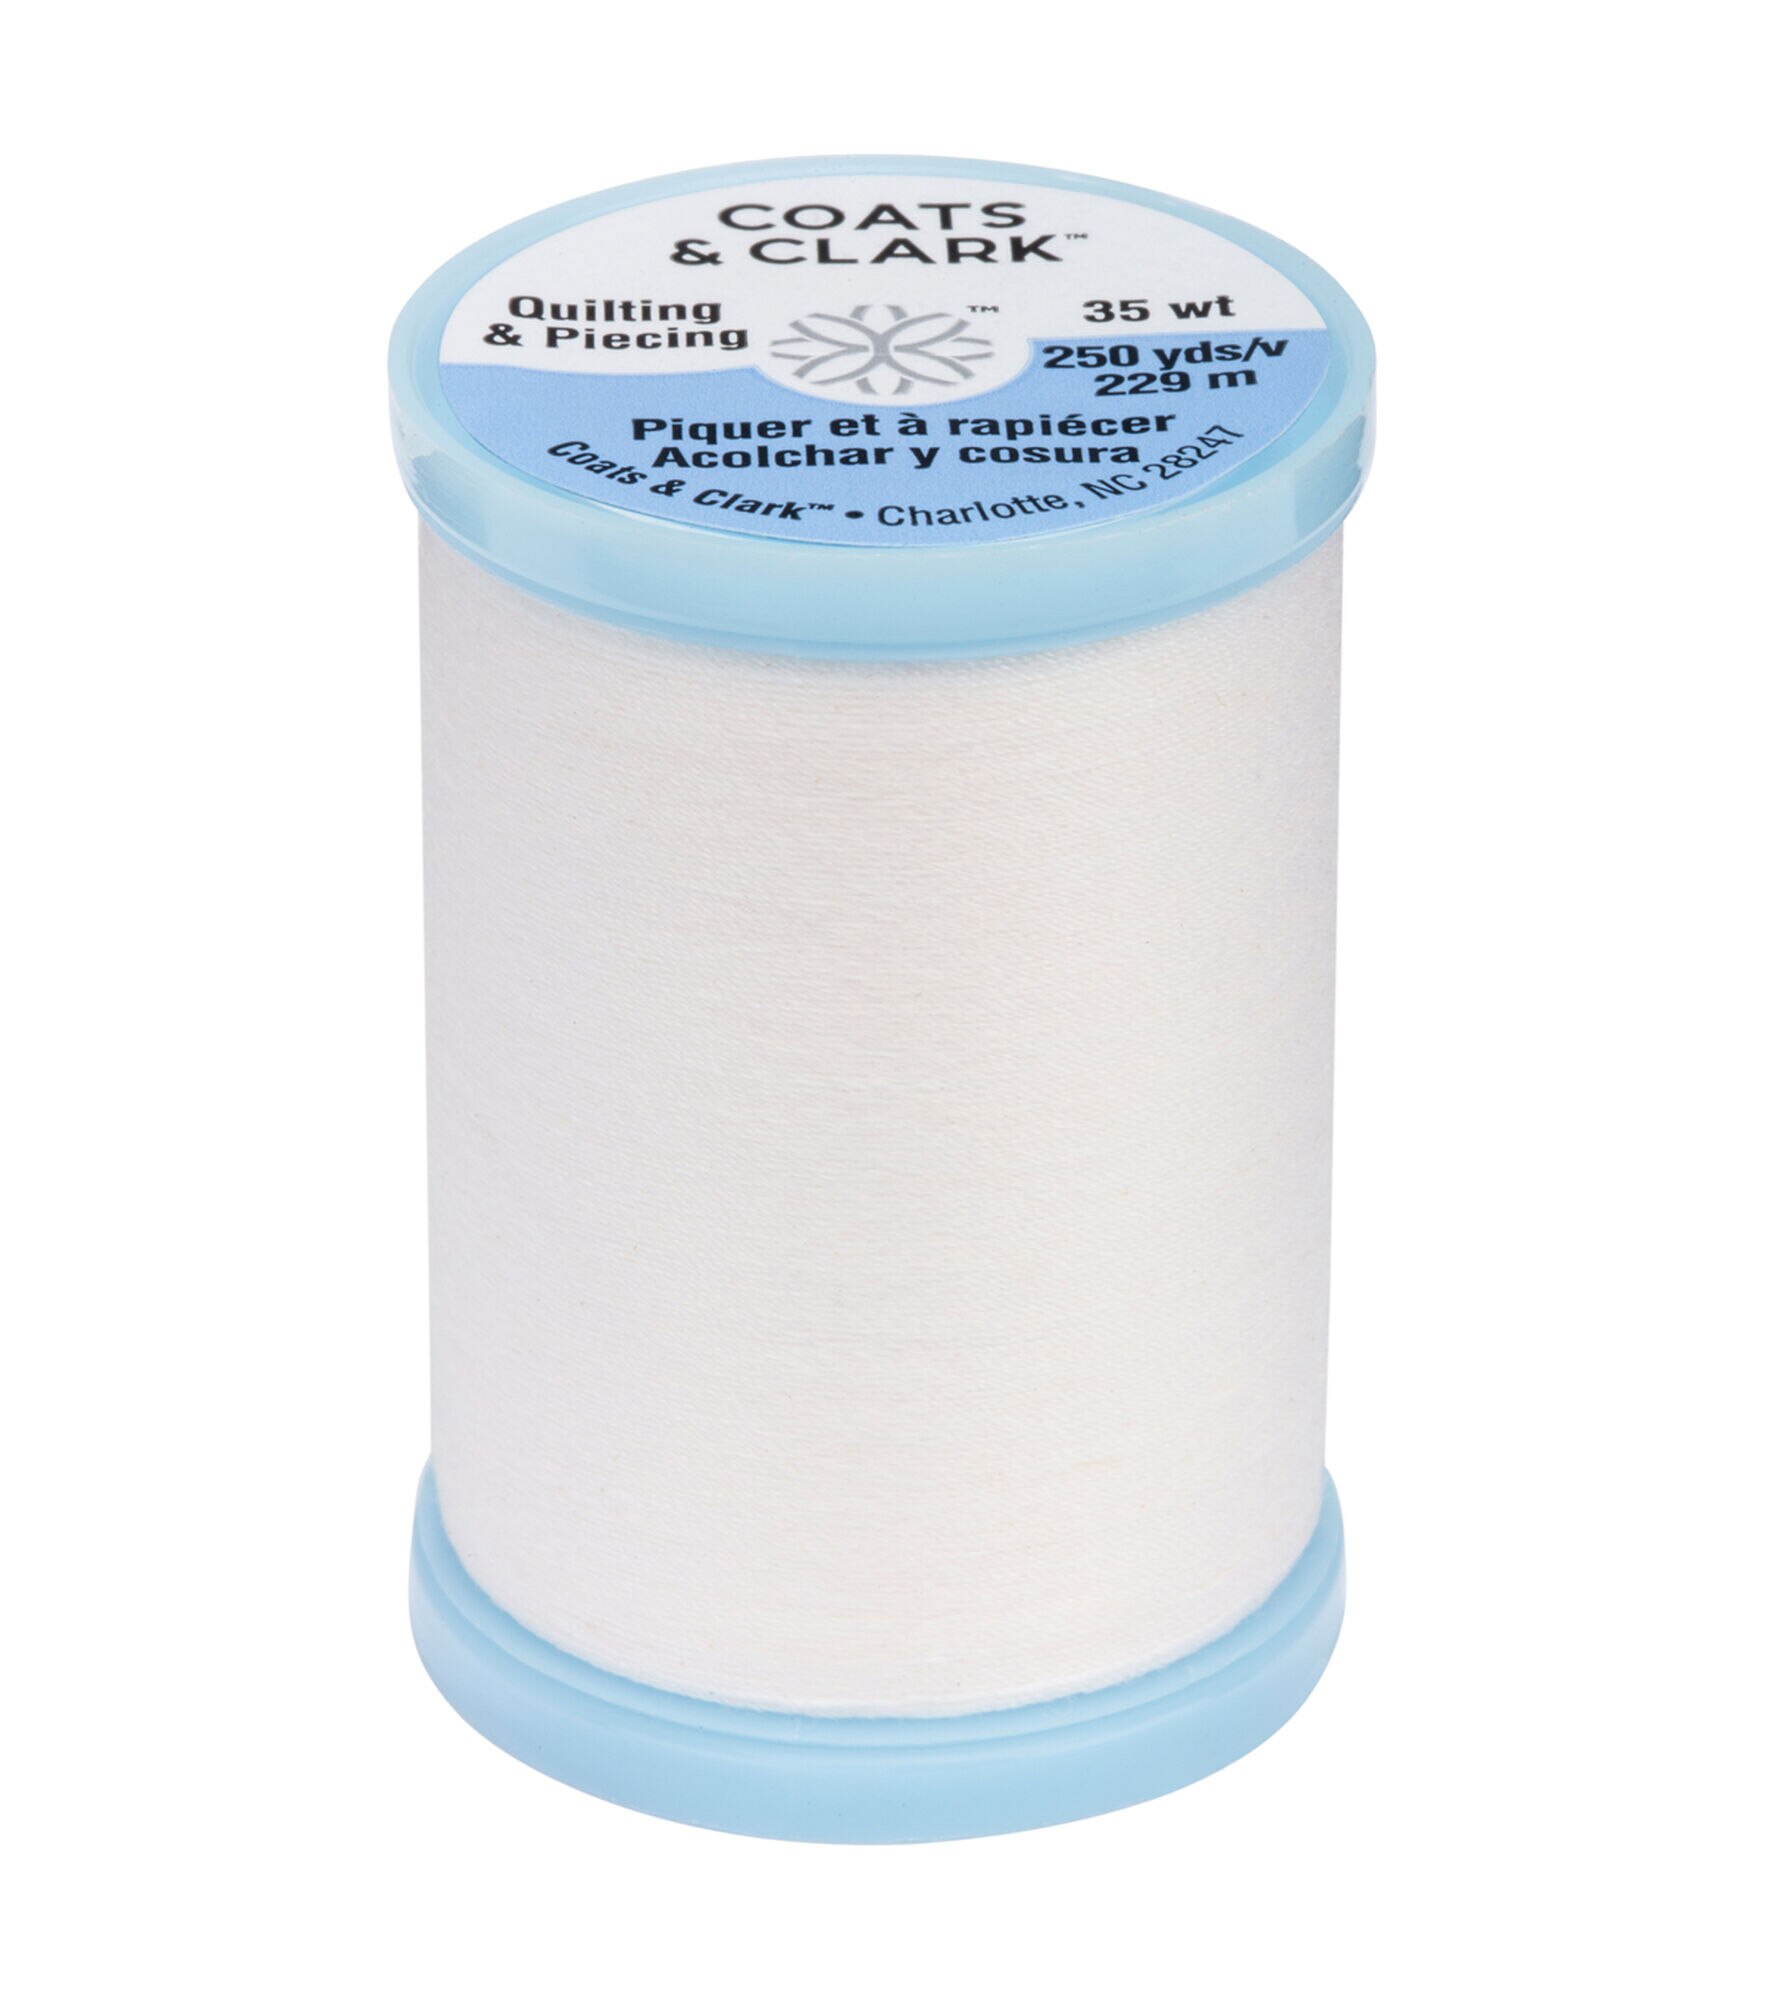 Coats & Clark 250yd 35wt Covered Quilting & Piecing Cotton Thread, 100 White, hi-res